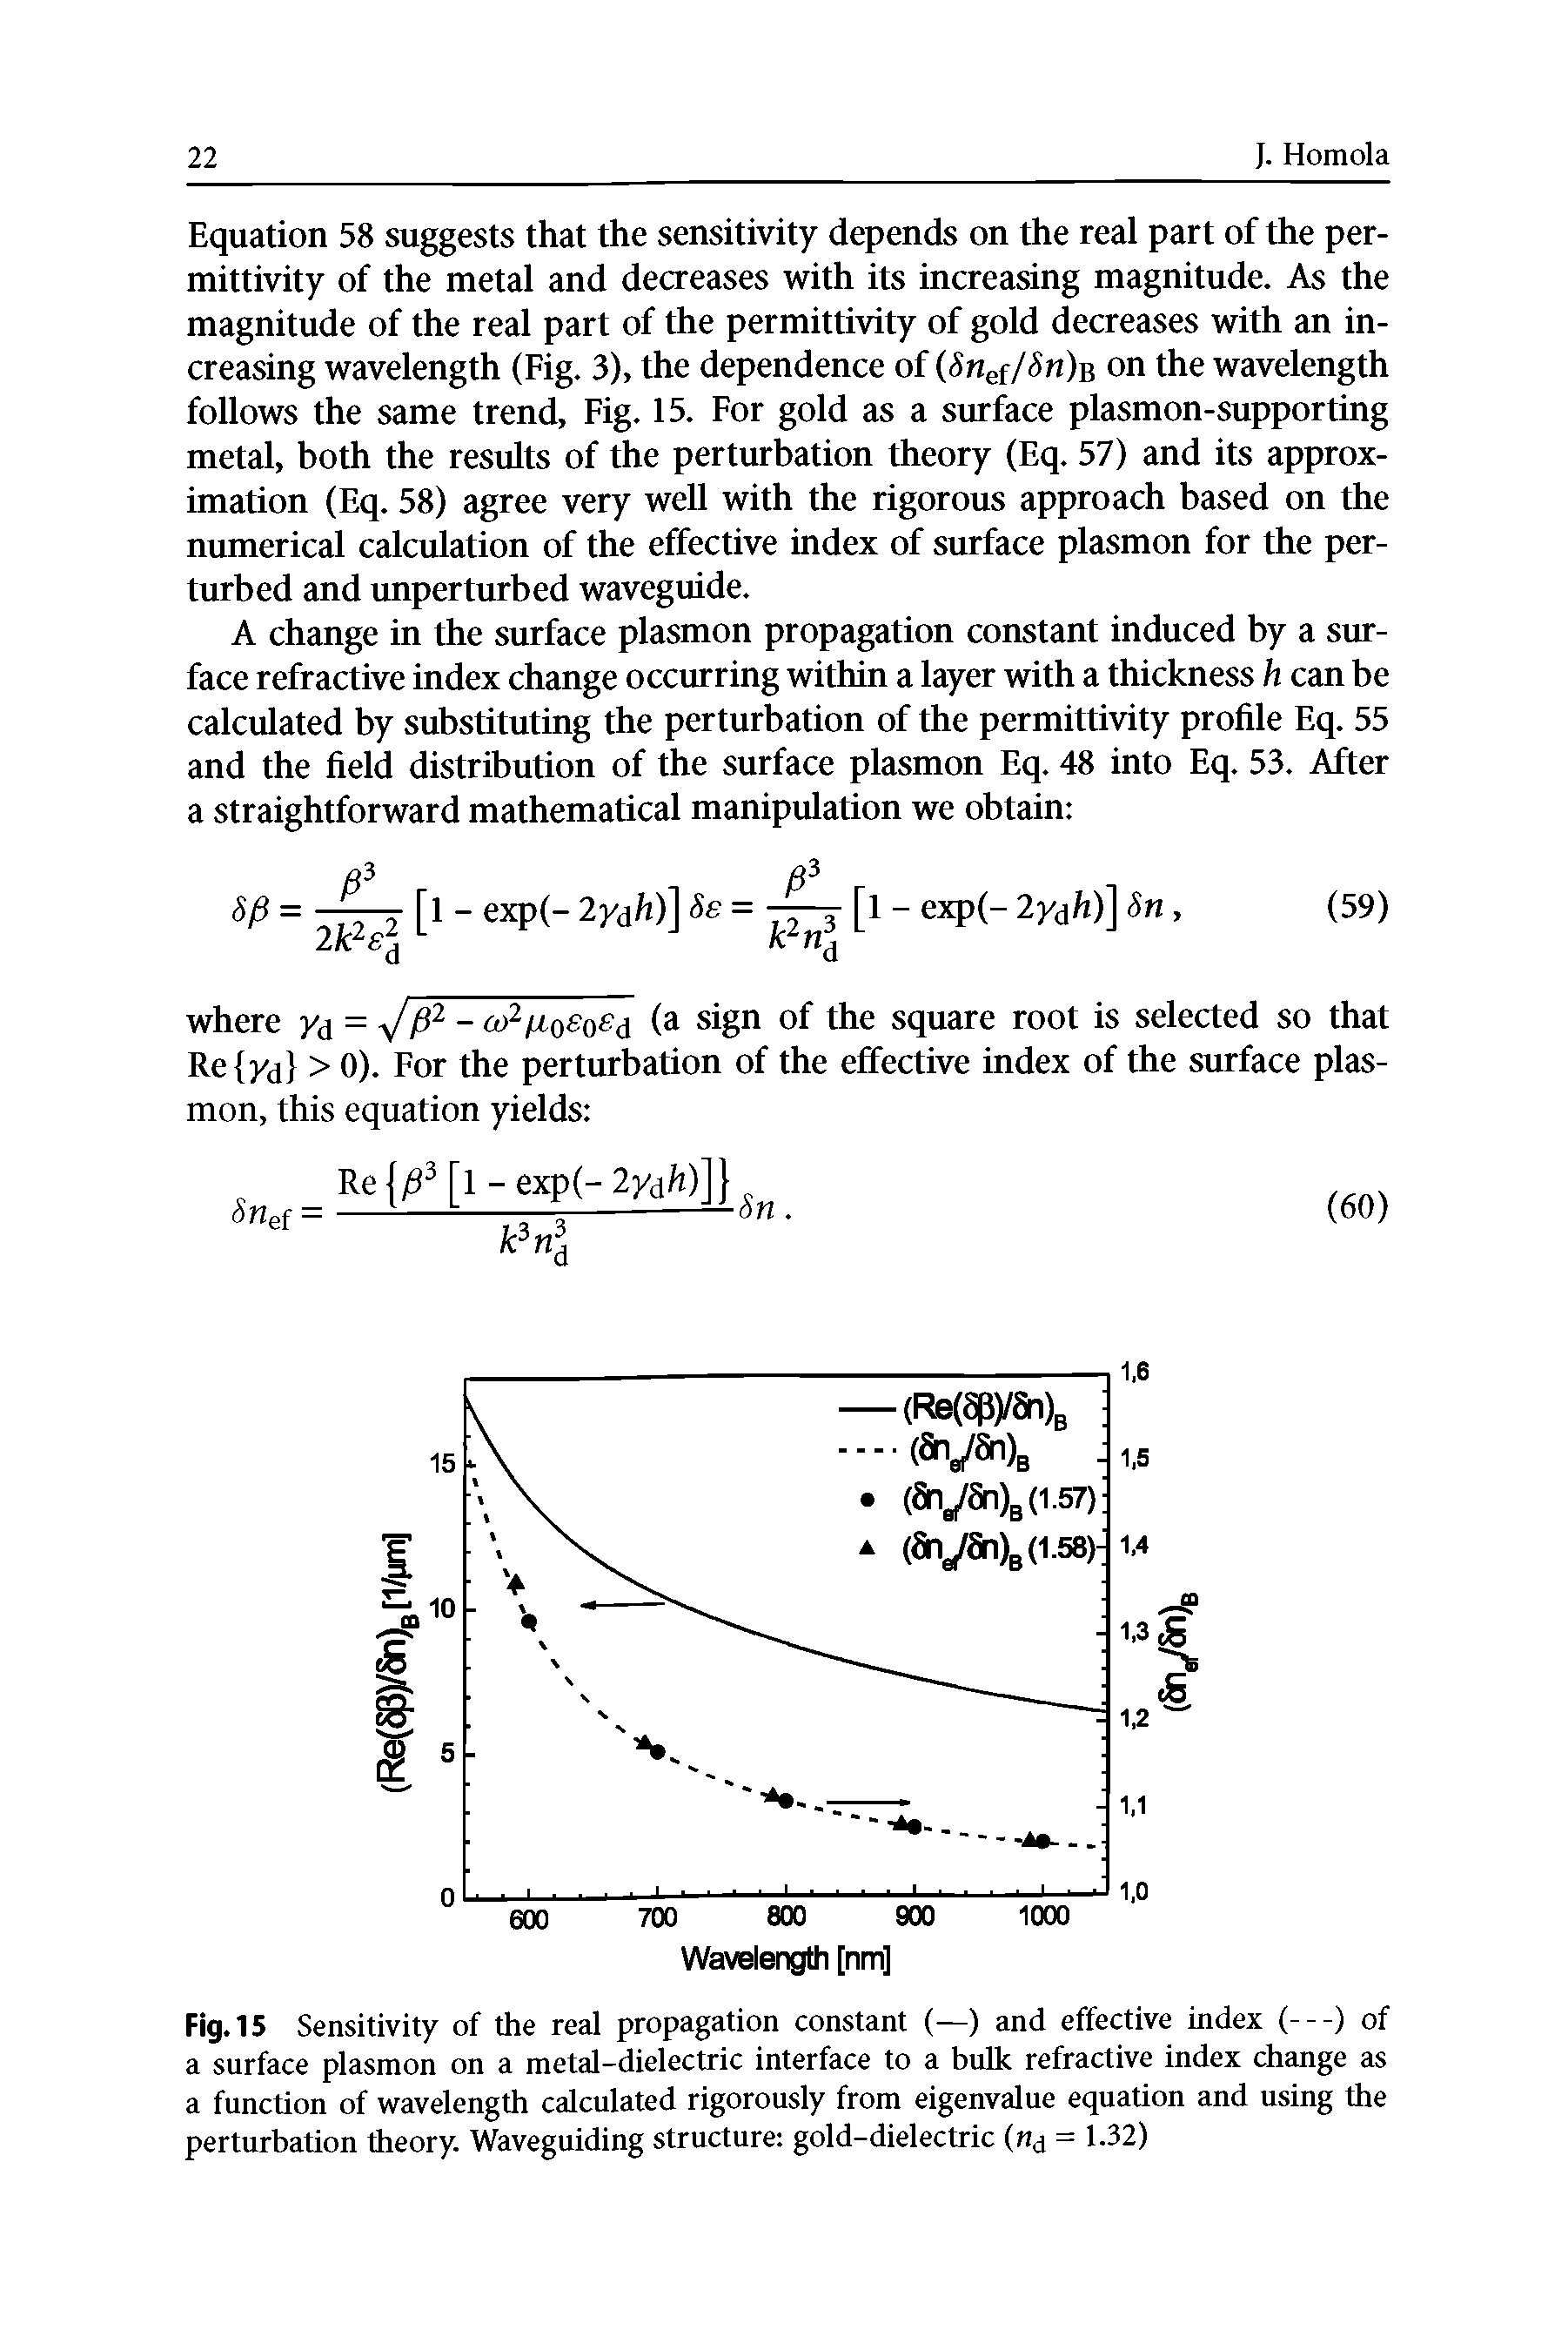 Fig. 15 Sensitivity of the real propagation constant (—) and effective index (---) of a surface plasmon on a metal-dielectric interface to a bulk refractive index change as a function of wavelength calculated rigorously from eigenvalue equation and using the perturbation theory. Waveguiding structure gold-dielectric (nj = 1.32)...